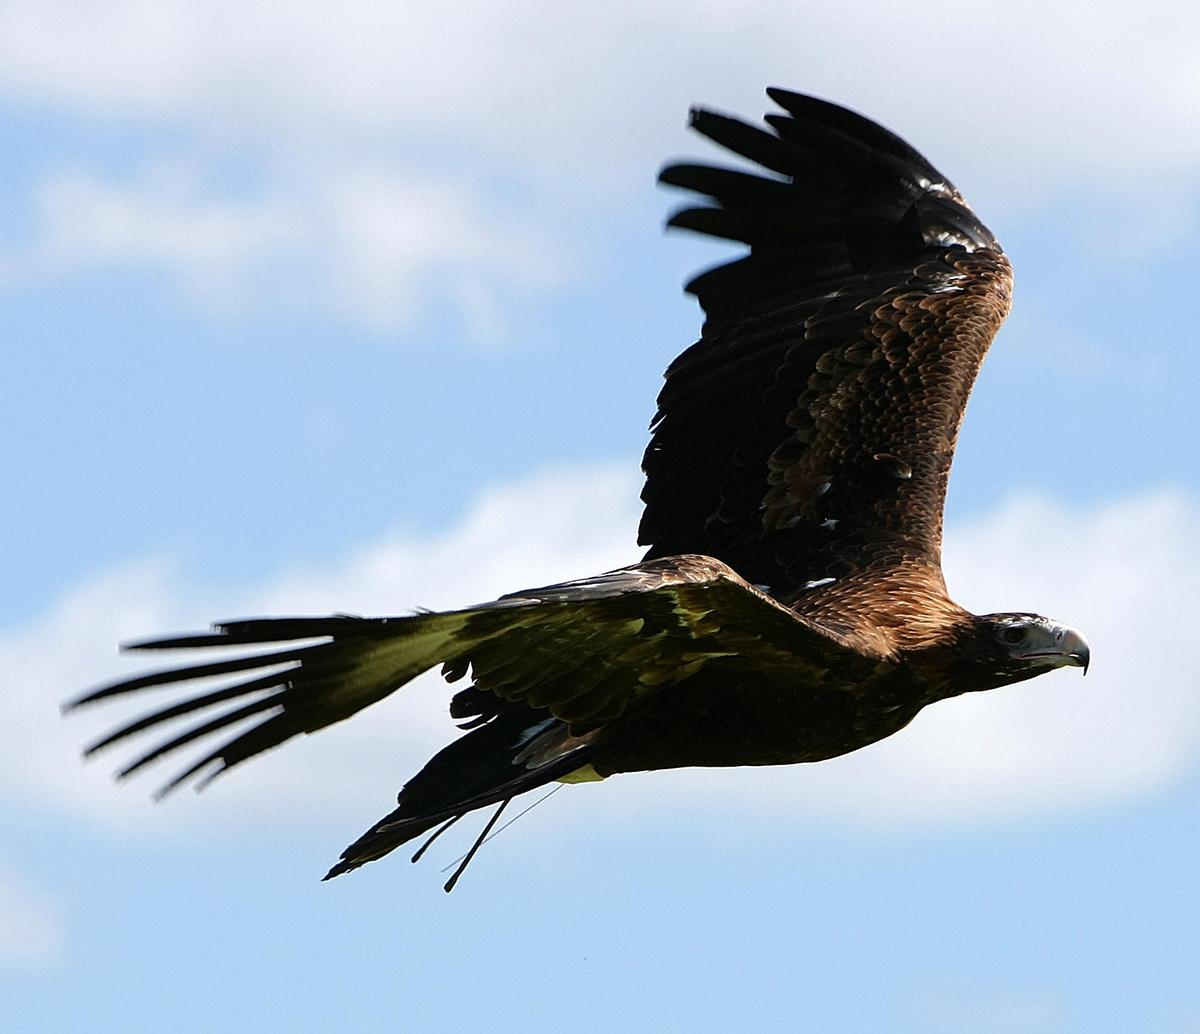 A wedge-tailed eagle, Australia's largest bird of prey. (<a href="https://www.gettyimages.co.uk/detail/news-photo/wedge-tailed-eagle-or-eaglehawk-australias-largest-bird-of-news-photo/84049366">TORSTEN BLACKWOOD/AFP via Getty Images</a>)